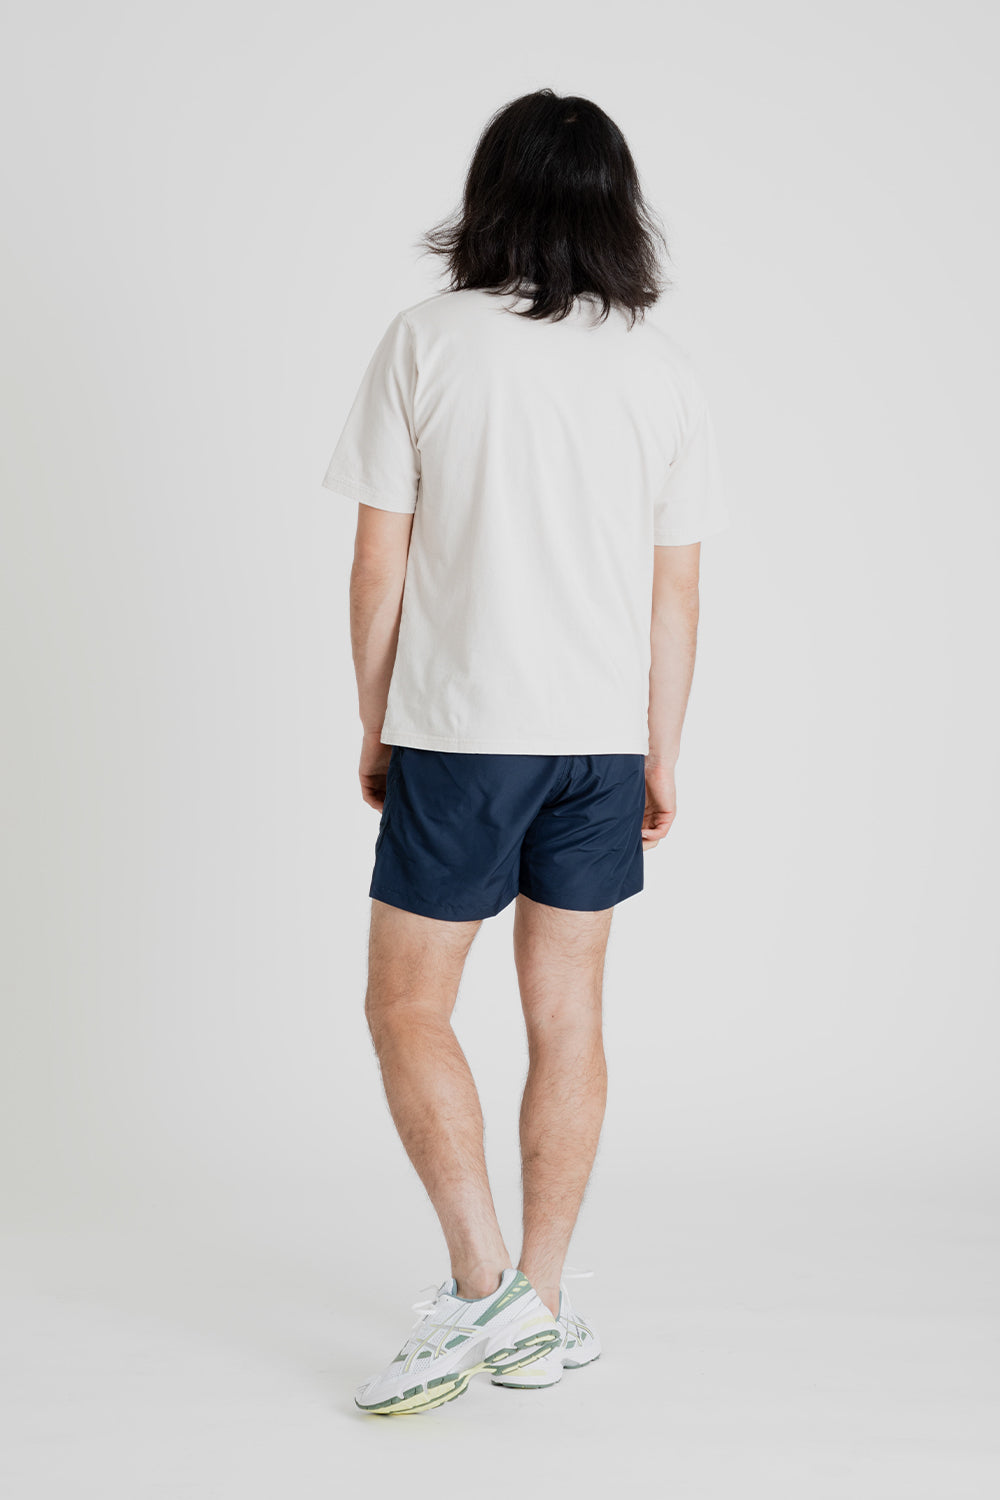 Foret Run Shorts in Navy